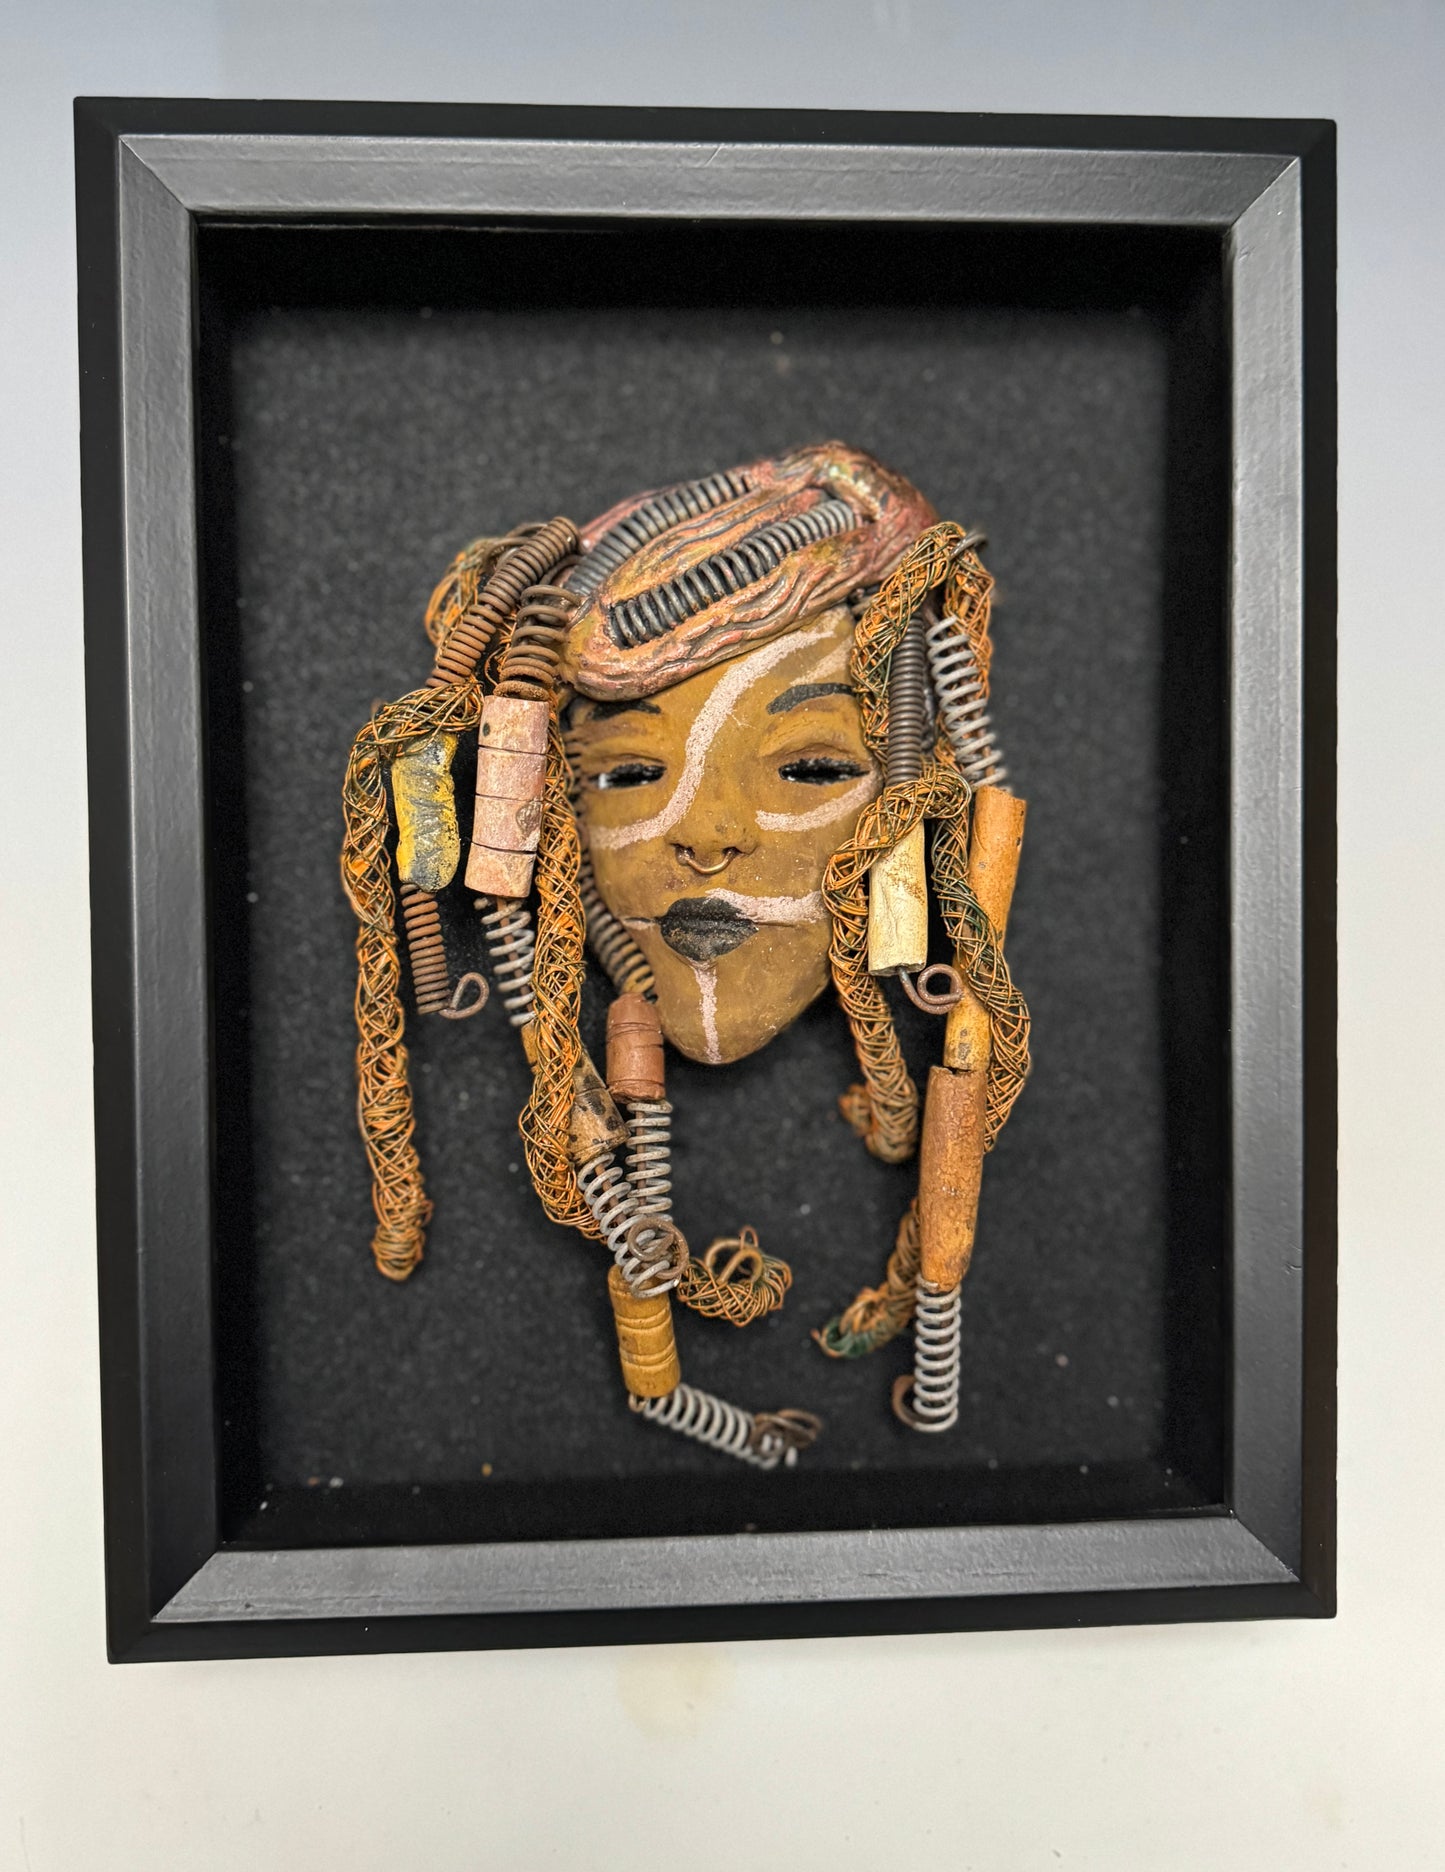 Weighing 6 oz and with a diameter of 5" by 8",  Addo adds mystic to any wall, tree or shadowbox. His earthy braids, honey brown complexion and dark lips make him the perfect first piece from the HerDew mask collection. Shadow box not included with Jaleni's purchase.  